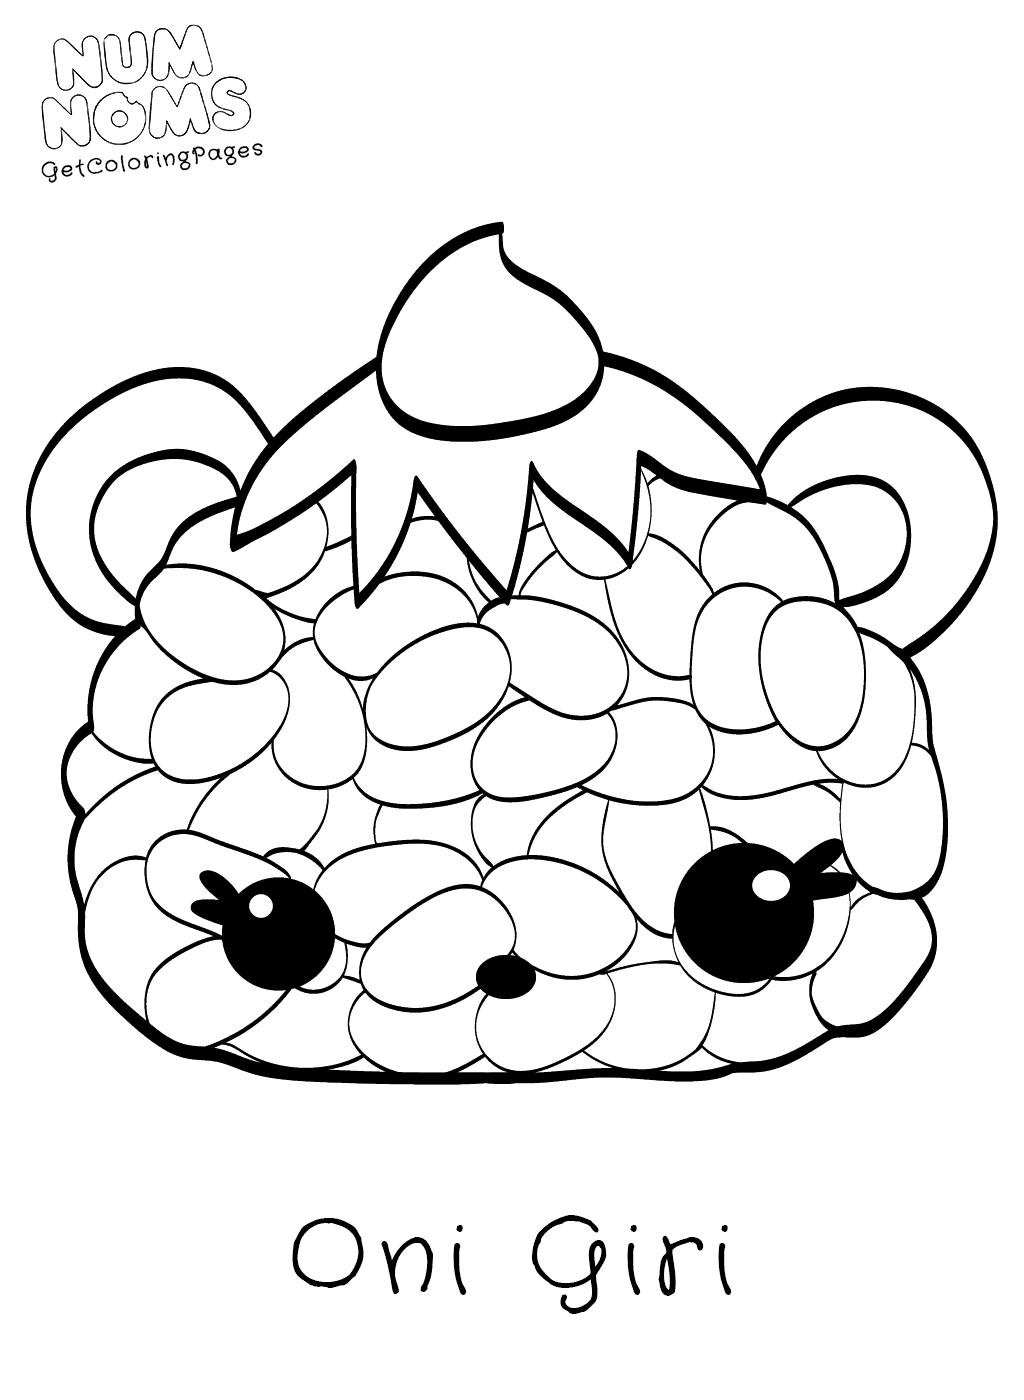 Sushi Oni Giri NumNoms Coloring Sheets - Get Coloring Pages